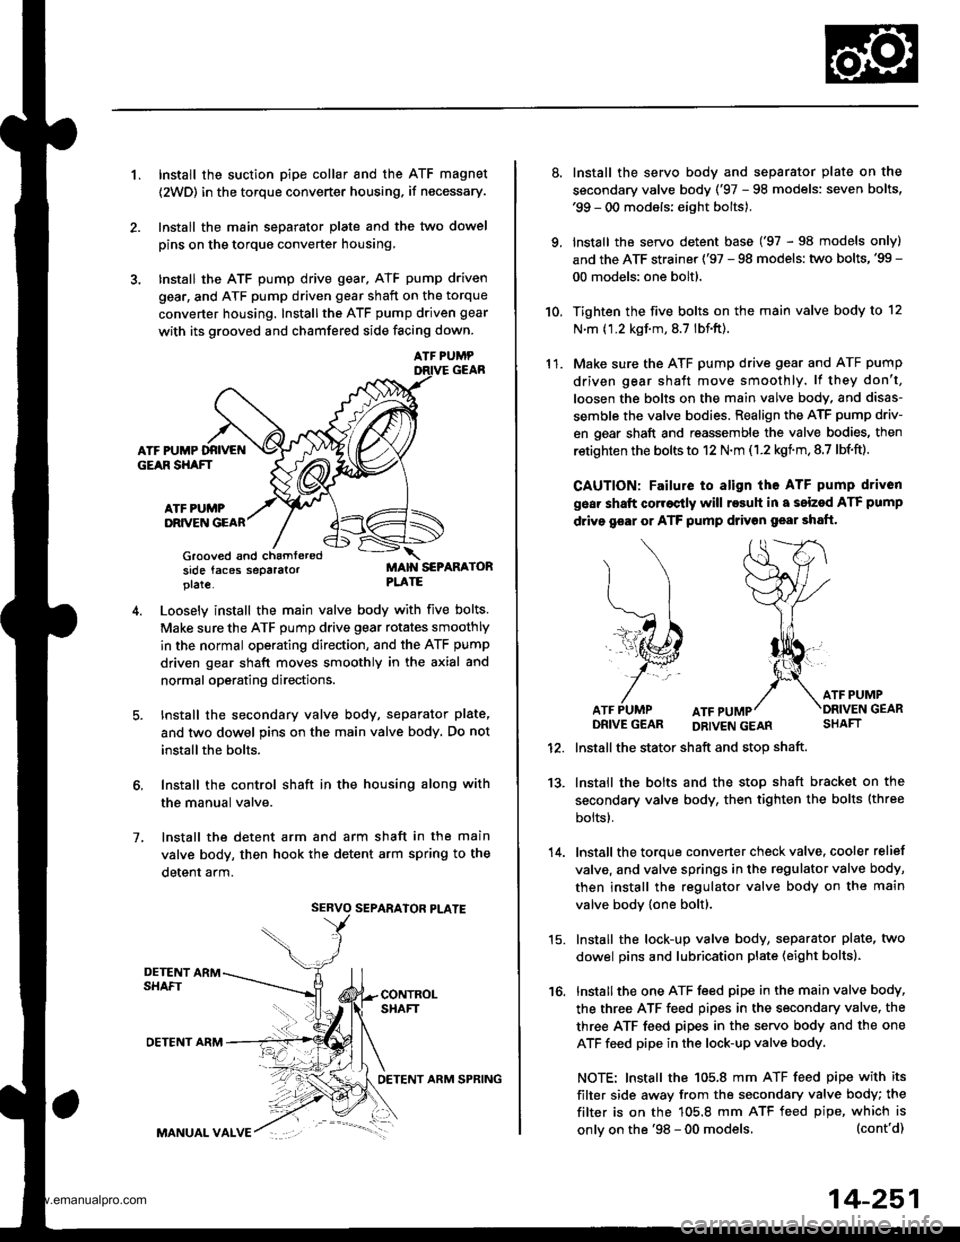 HONDA CR-V 1998 RD1-RD3 / 1.G Workshop Manual 
1.Install the suction pipe collar and the ATF magnet
{2WD) in the torque converter housing, if necessary.
lnstall the main seDarator Dlate and the two dowel
pins on the torque converter housing,
Inst